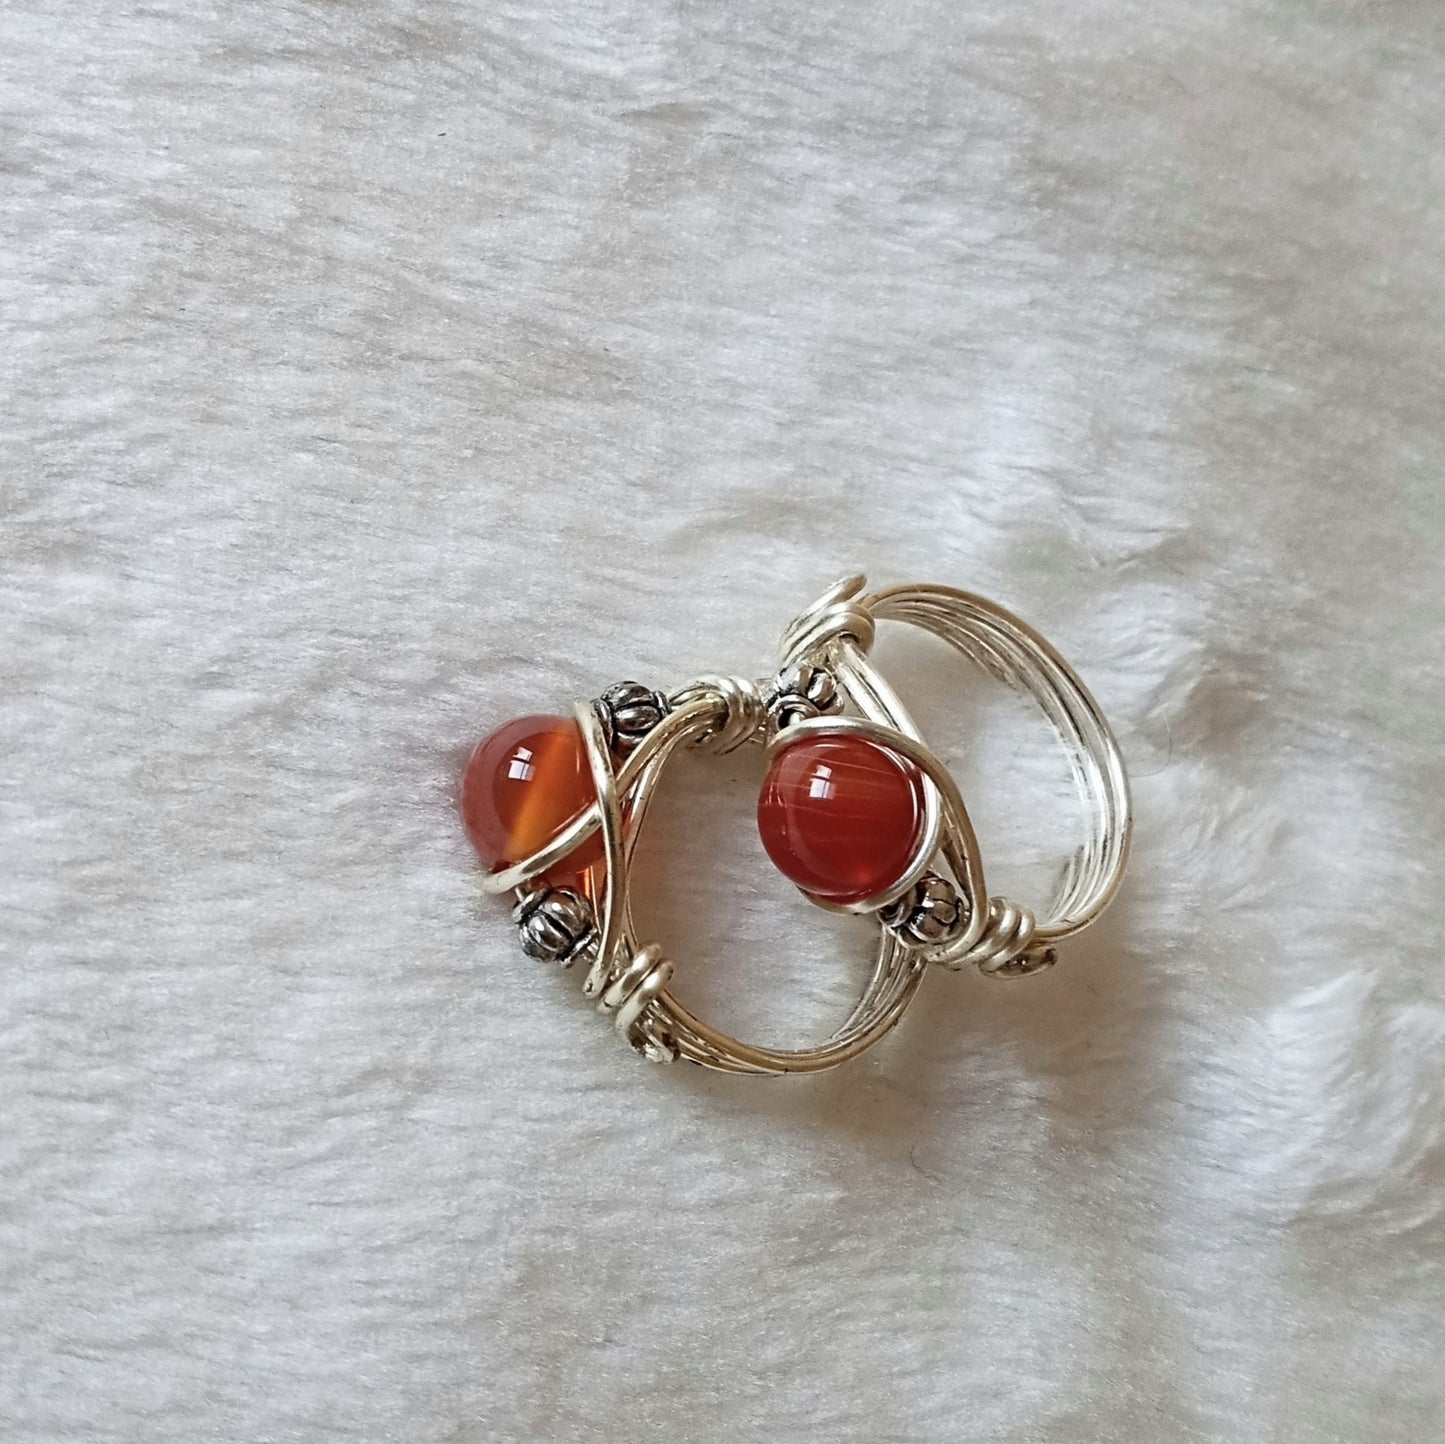 Carnelian Wire Wrapped Ring